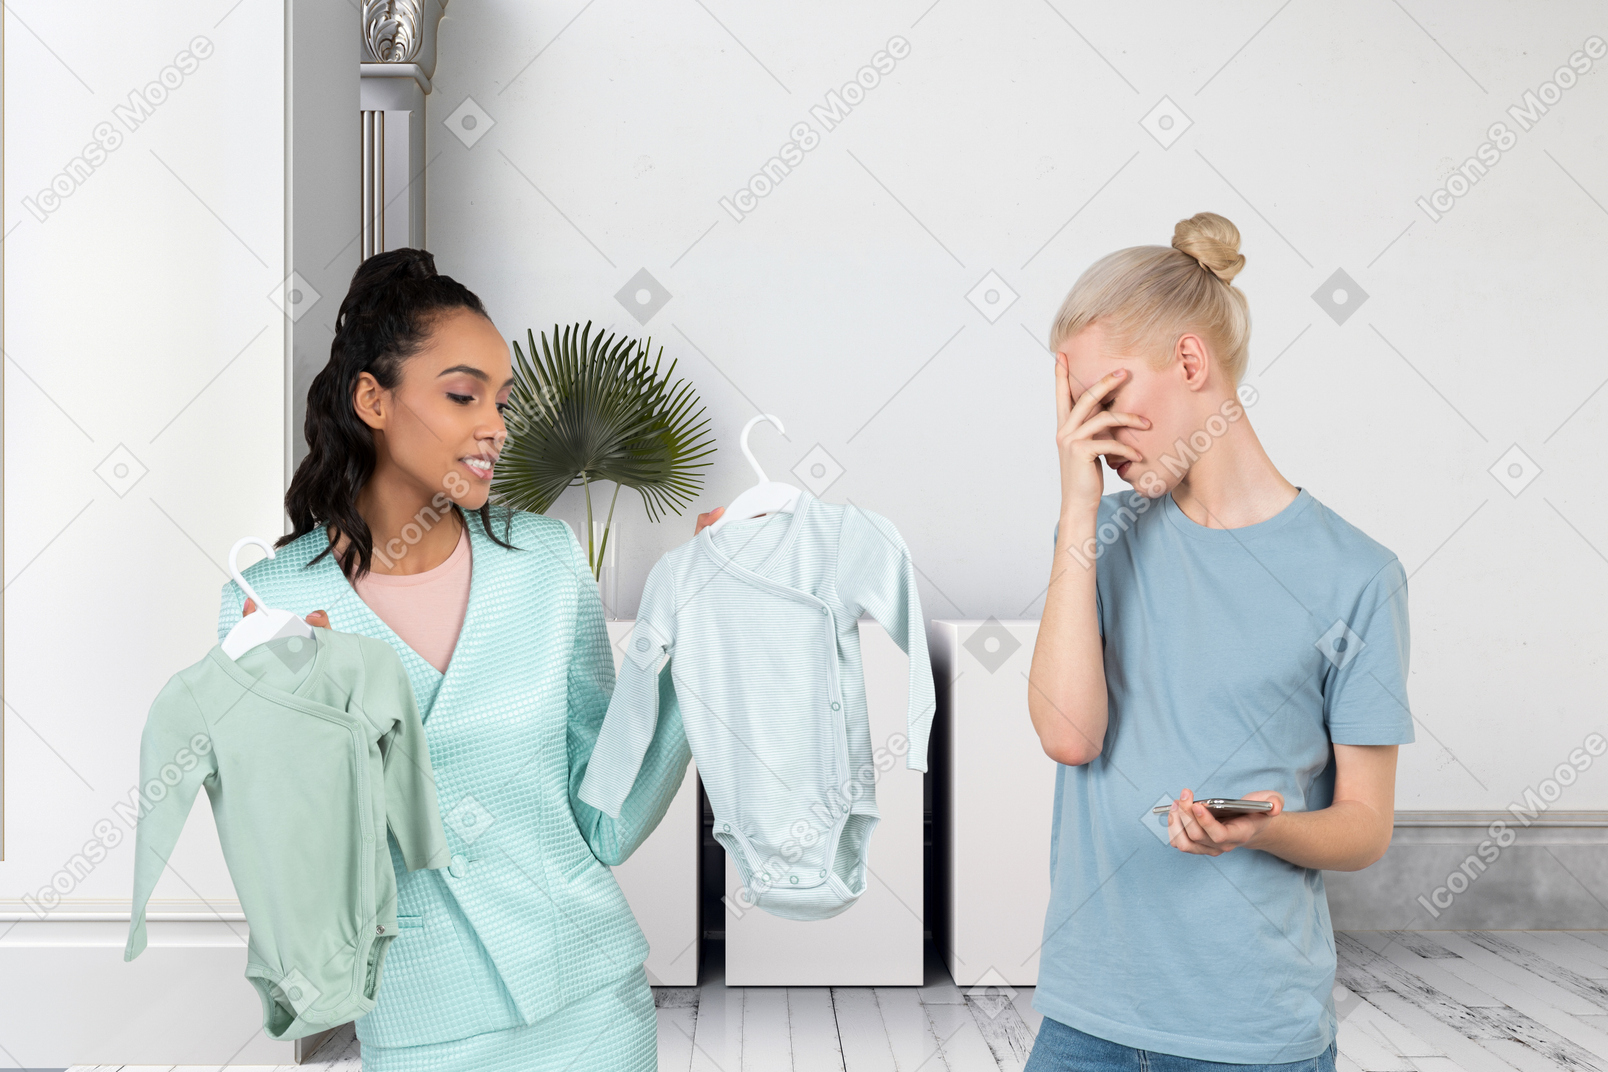 Woman and person looking at baby clothes